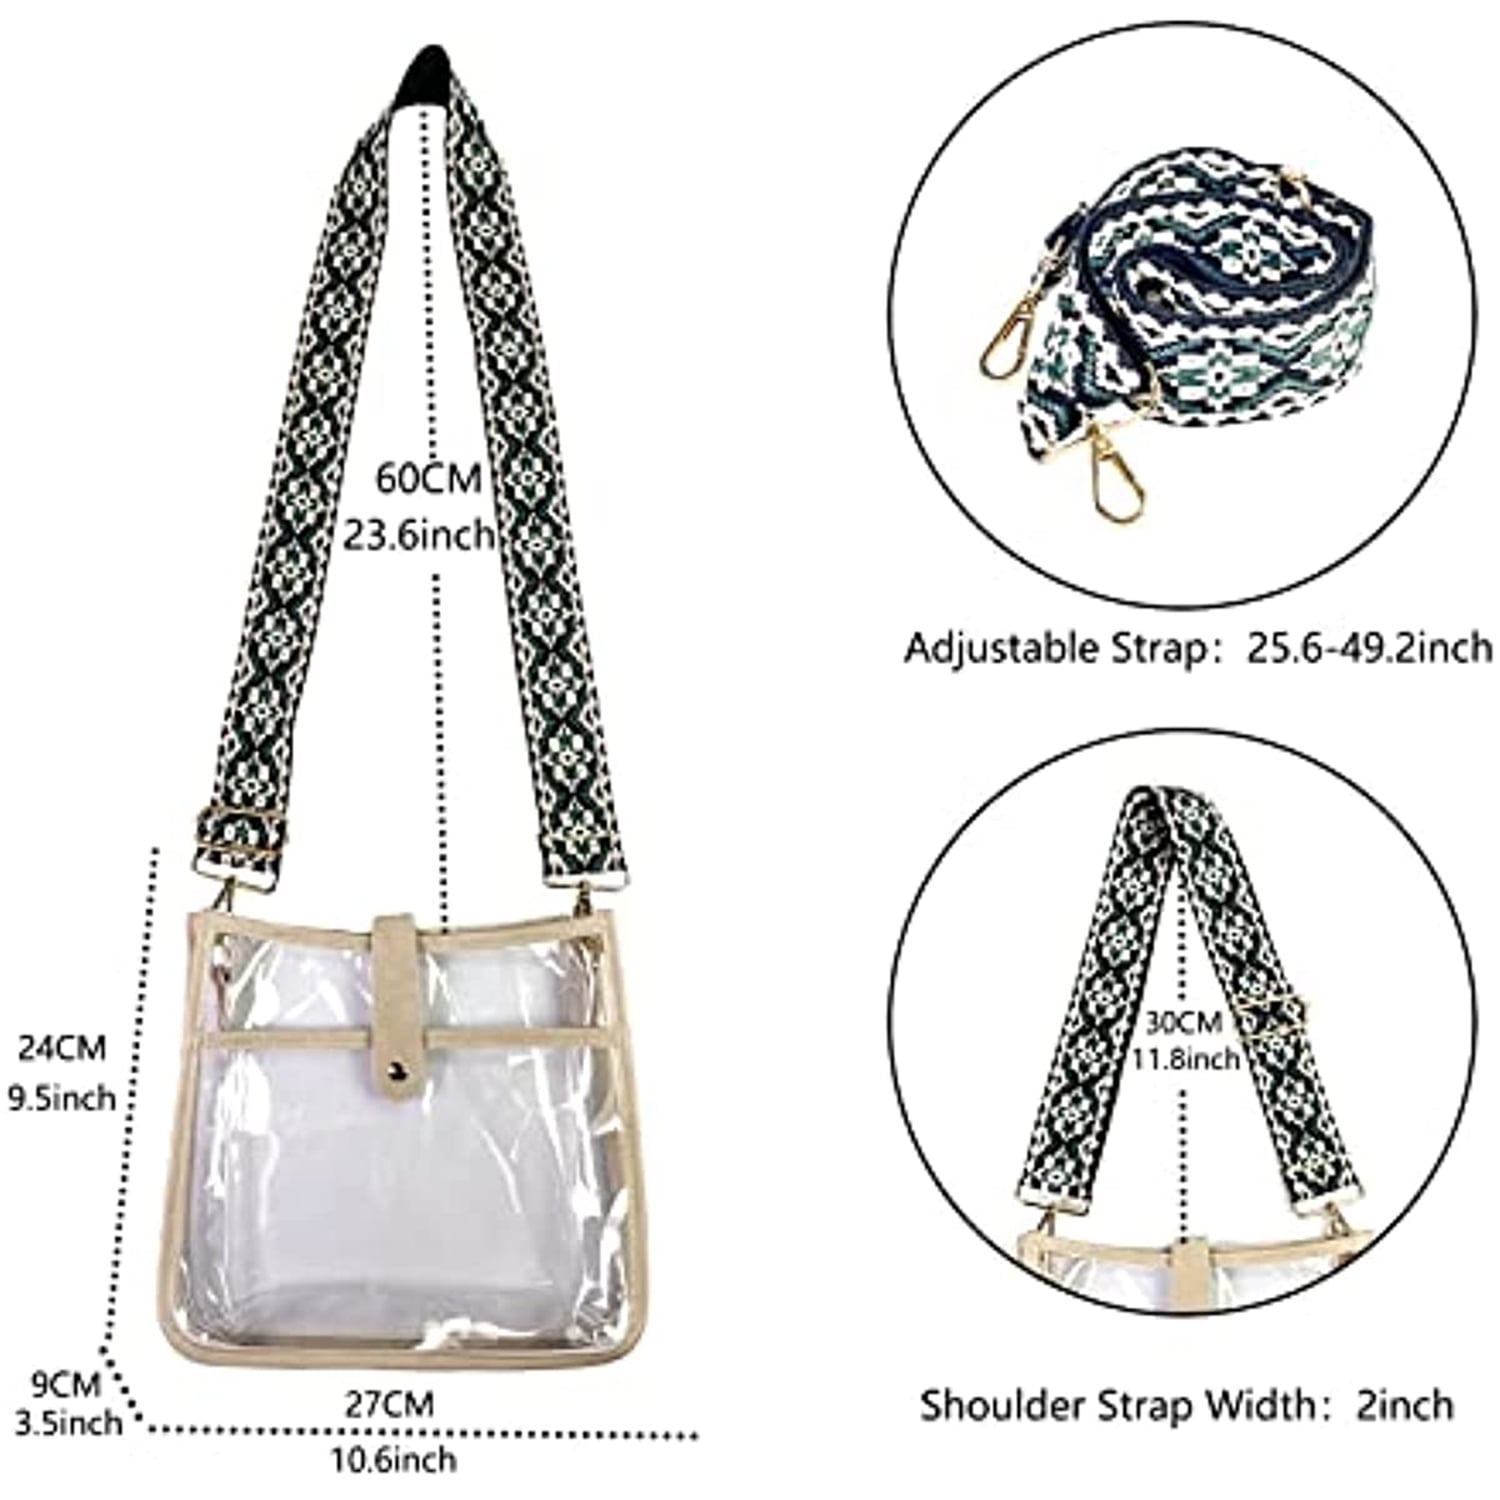 Juoxeepy Clear Bag Stadium Approved Clear Purse Concert Stadium Clear  Crossbody Bag PVC Clear Shoulder Bag Clutch